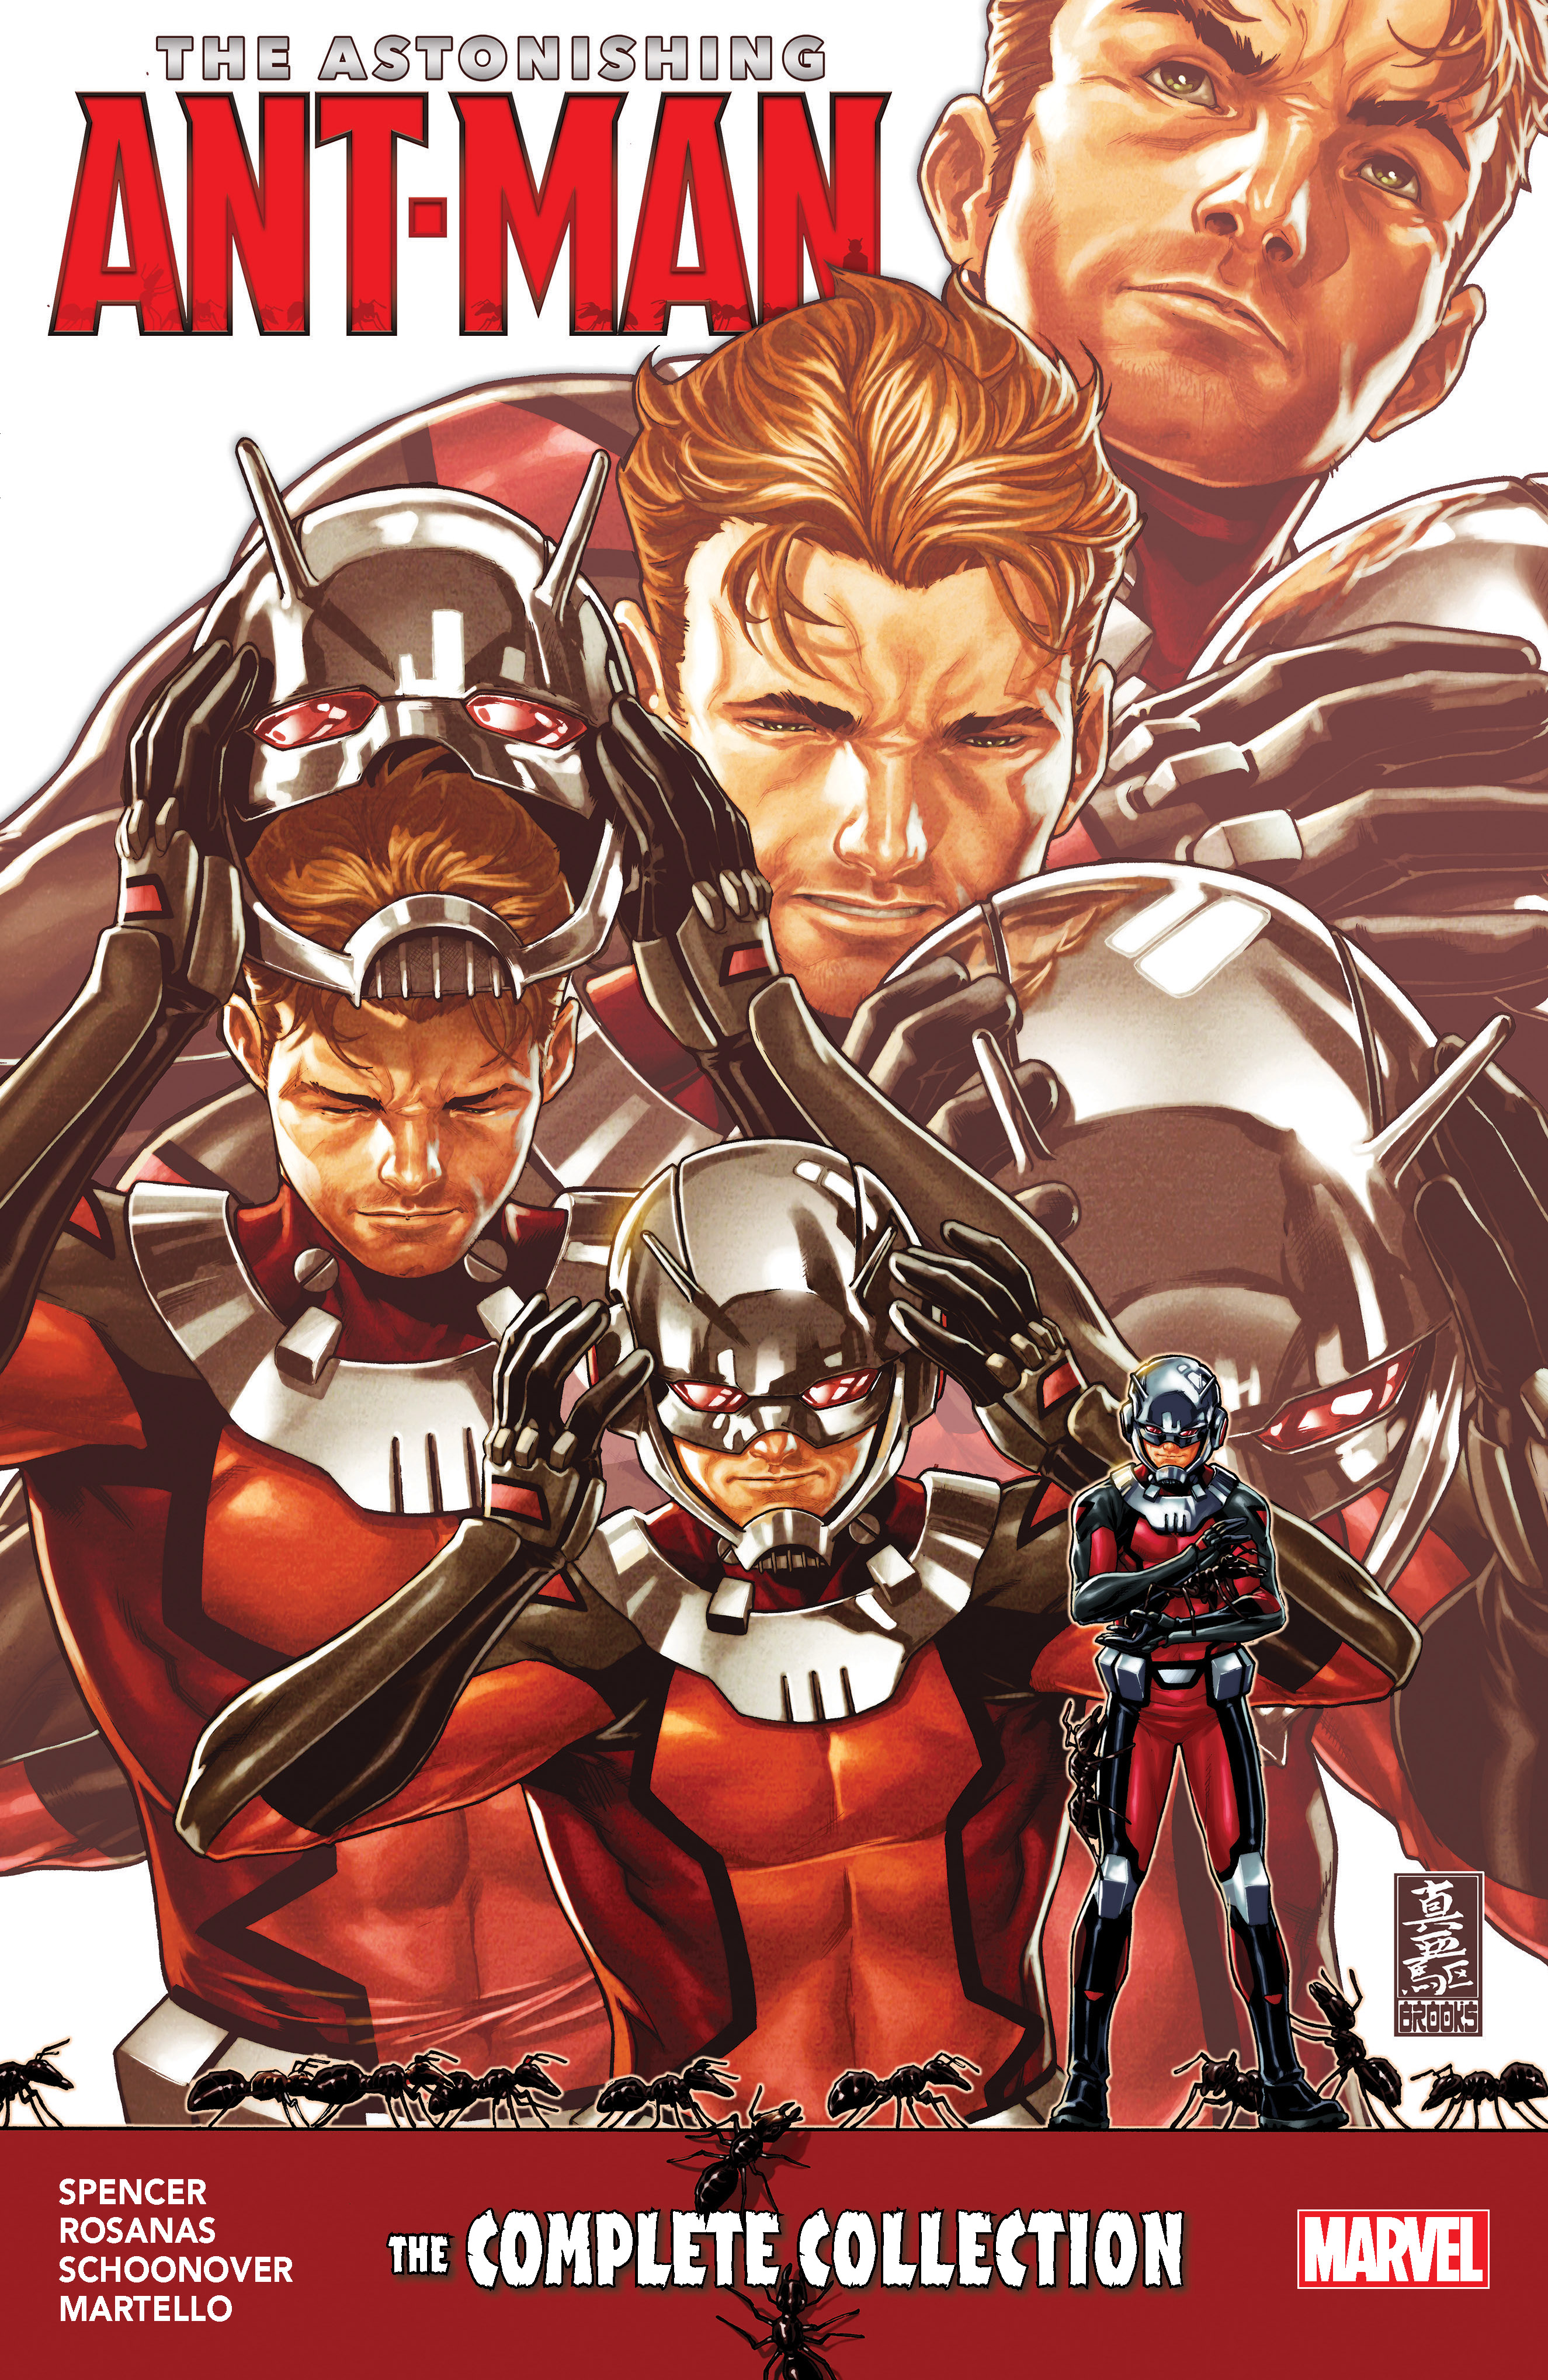 The Astonishing Ant-Man: The Complete Collection (Trade Paperback)